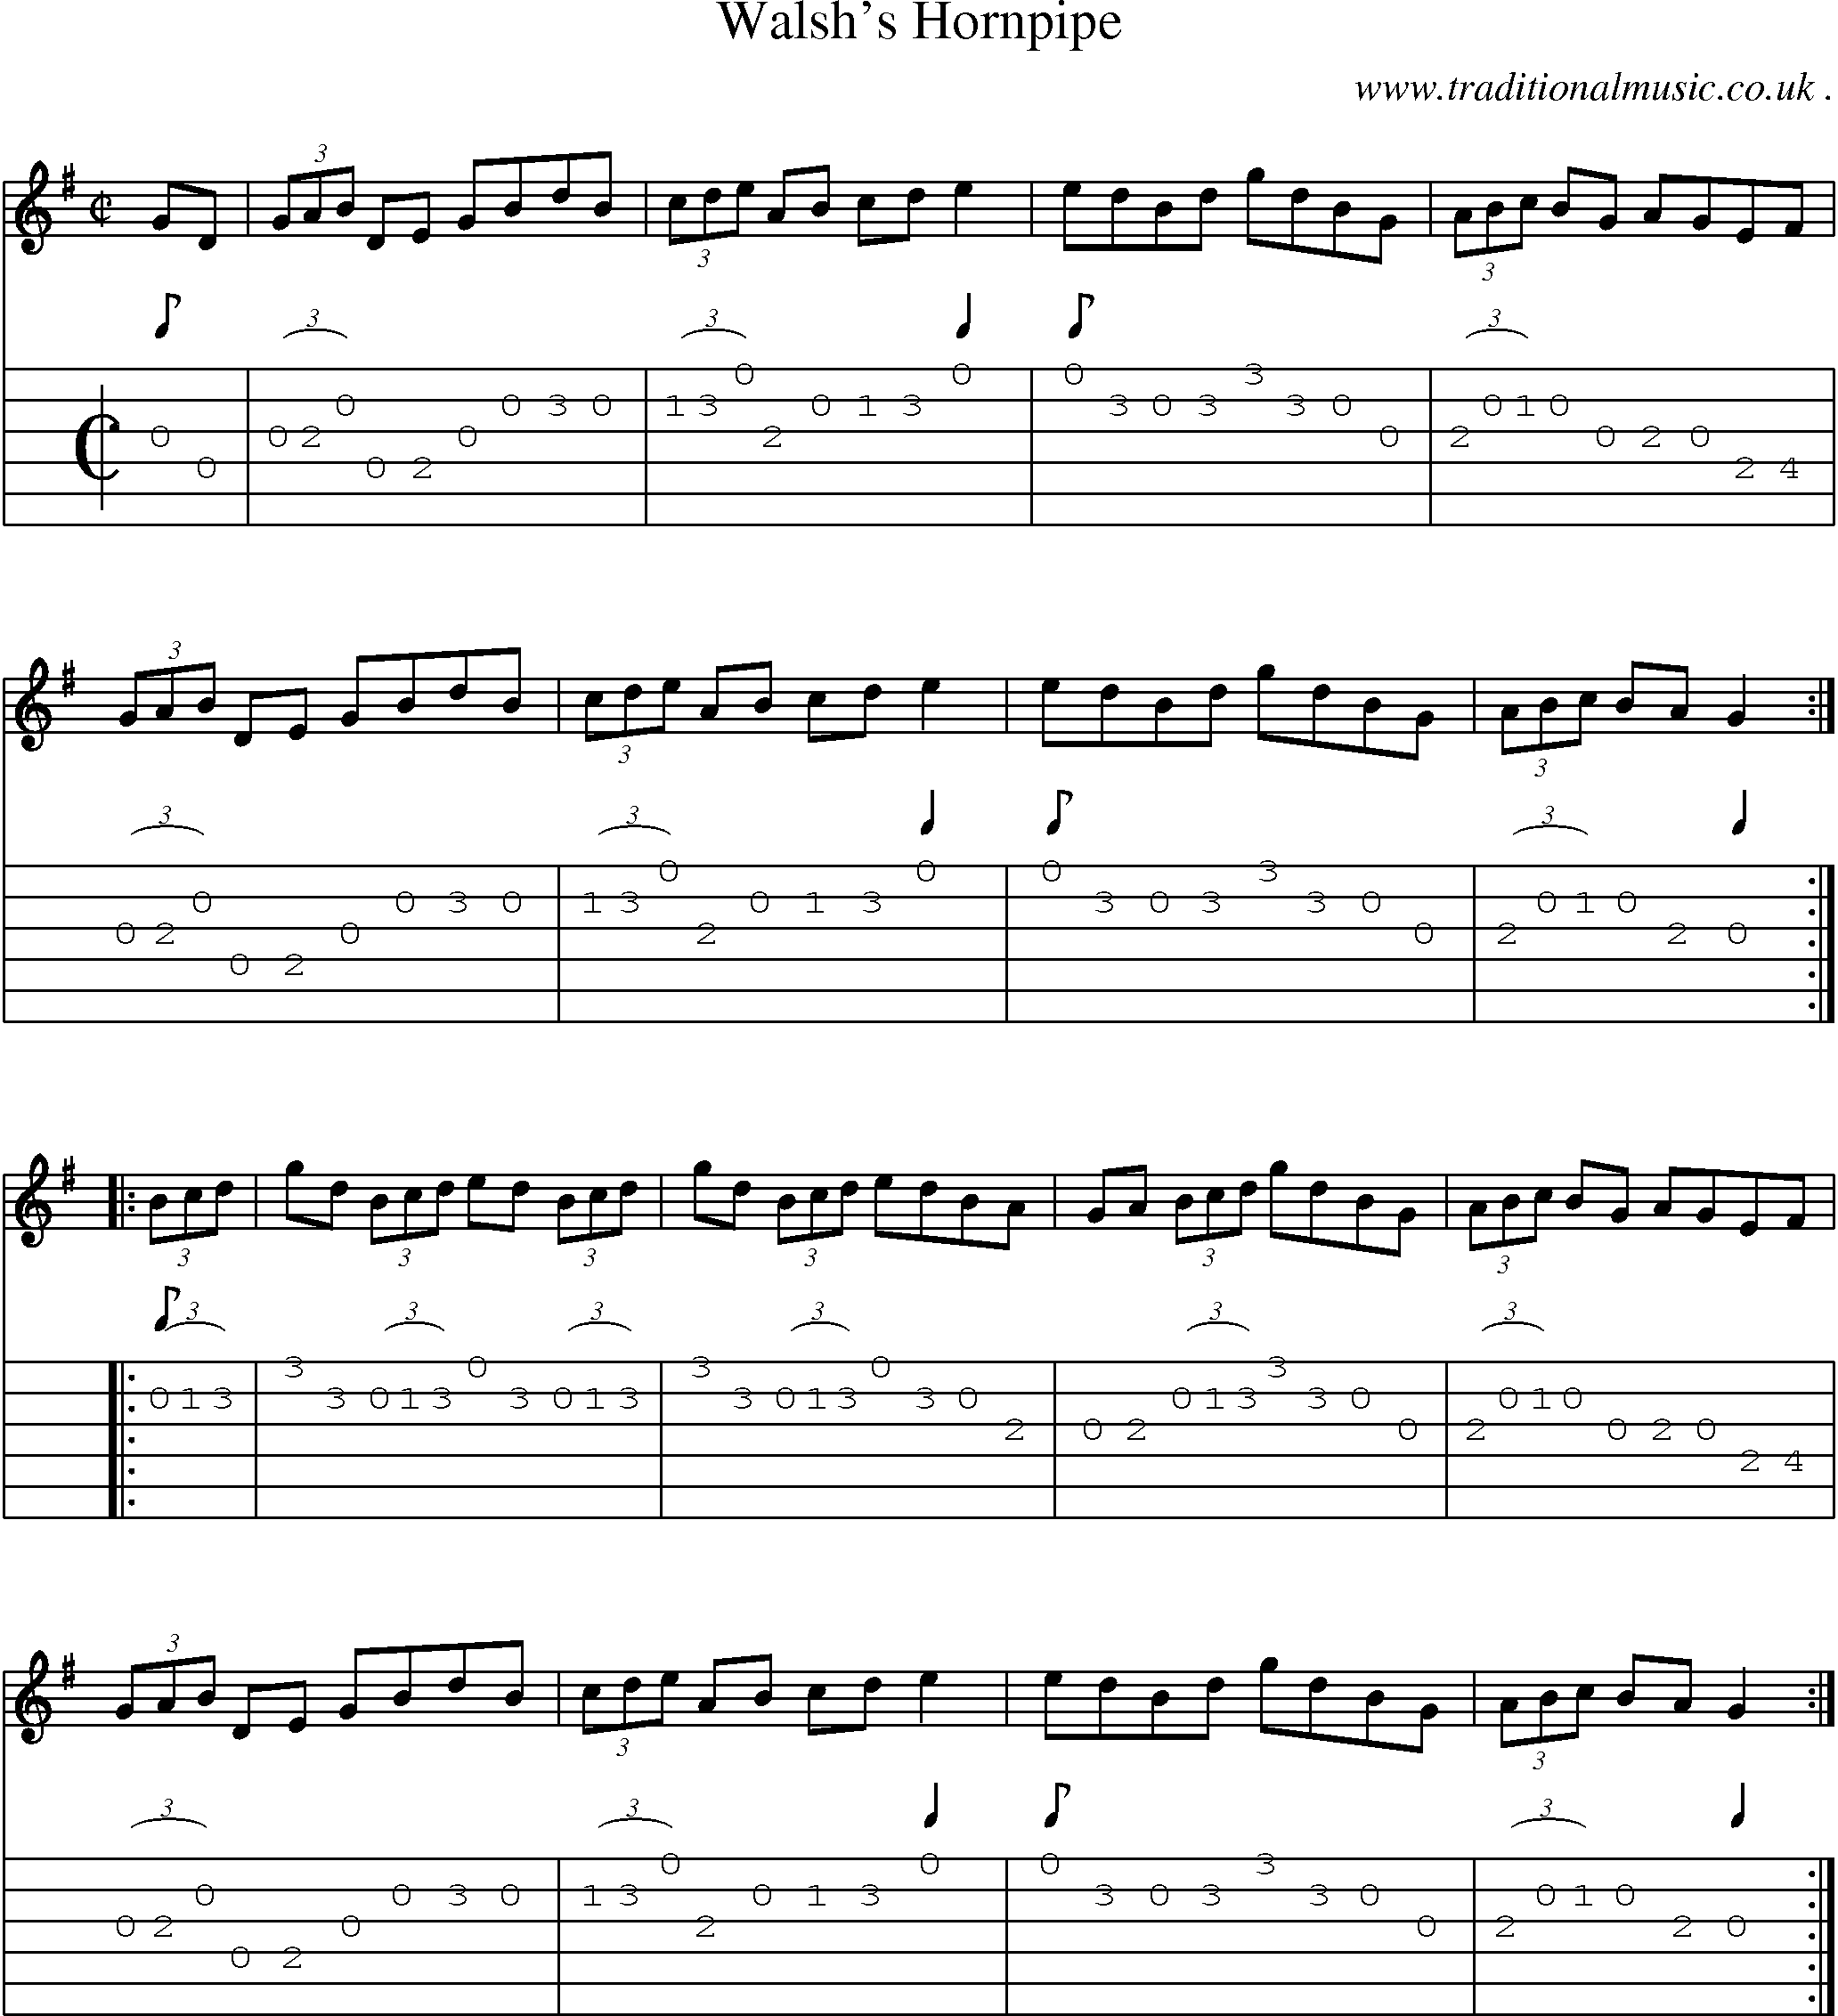 Sheet-Music and Guitar Tabs for Walshs Hornpipe